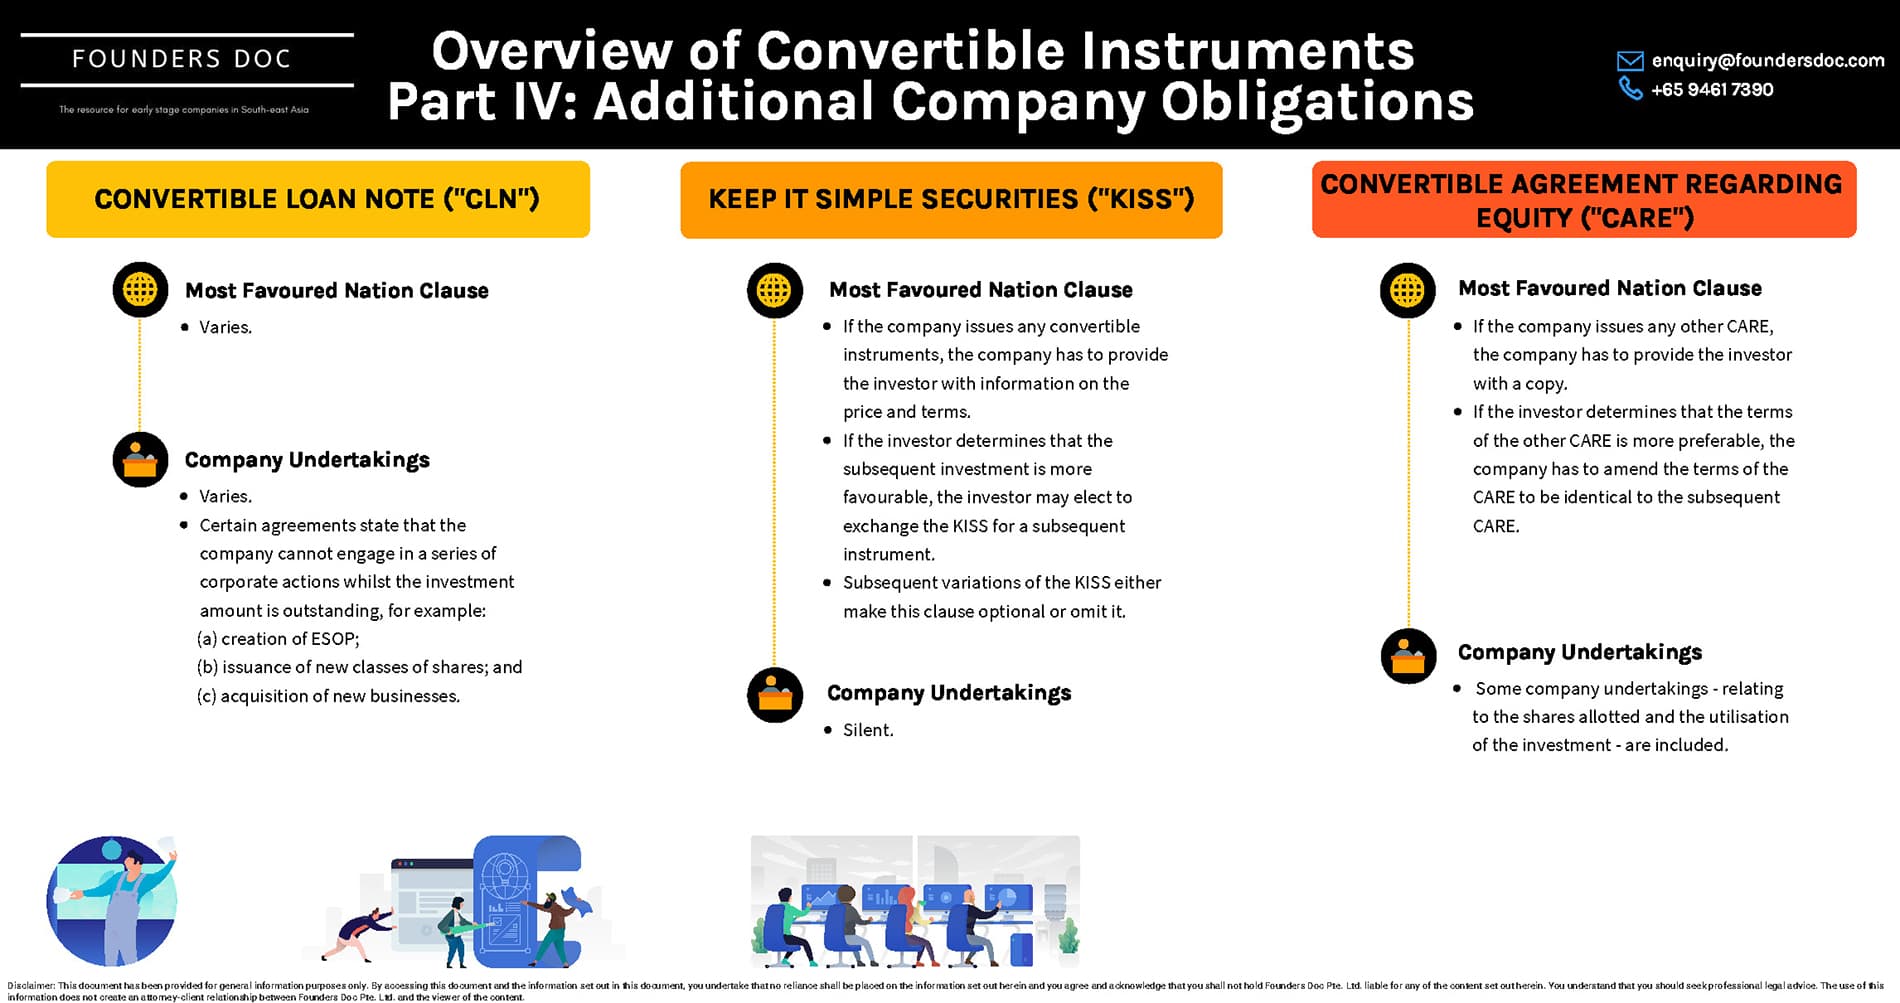 Overview of Convertible Instruments in Singapore